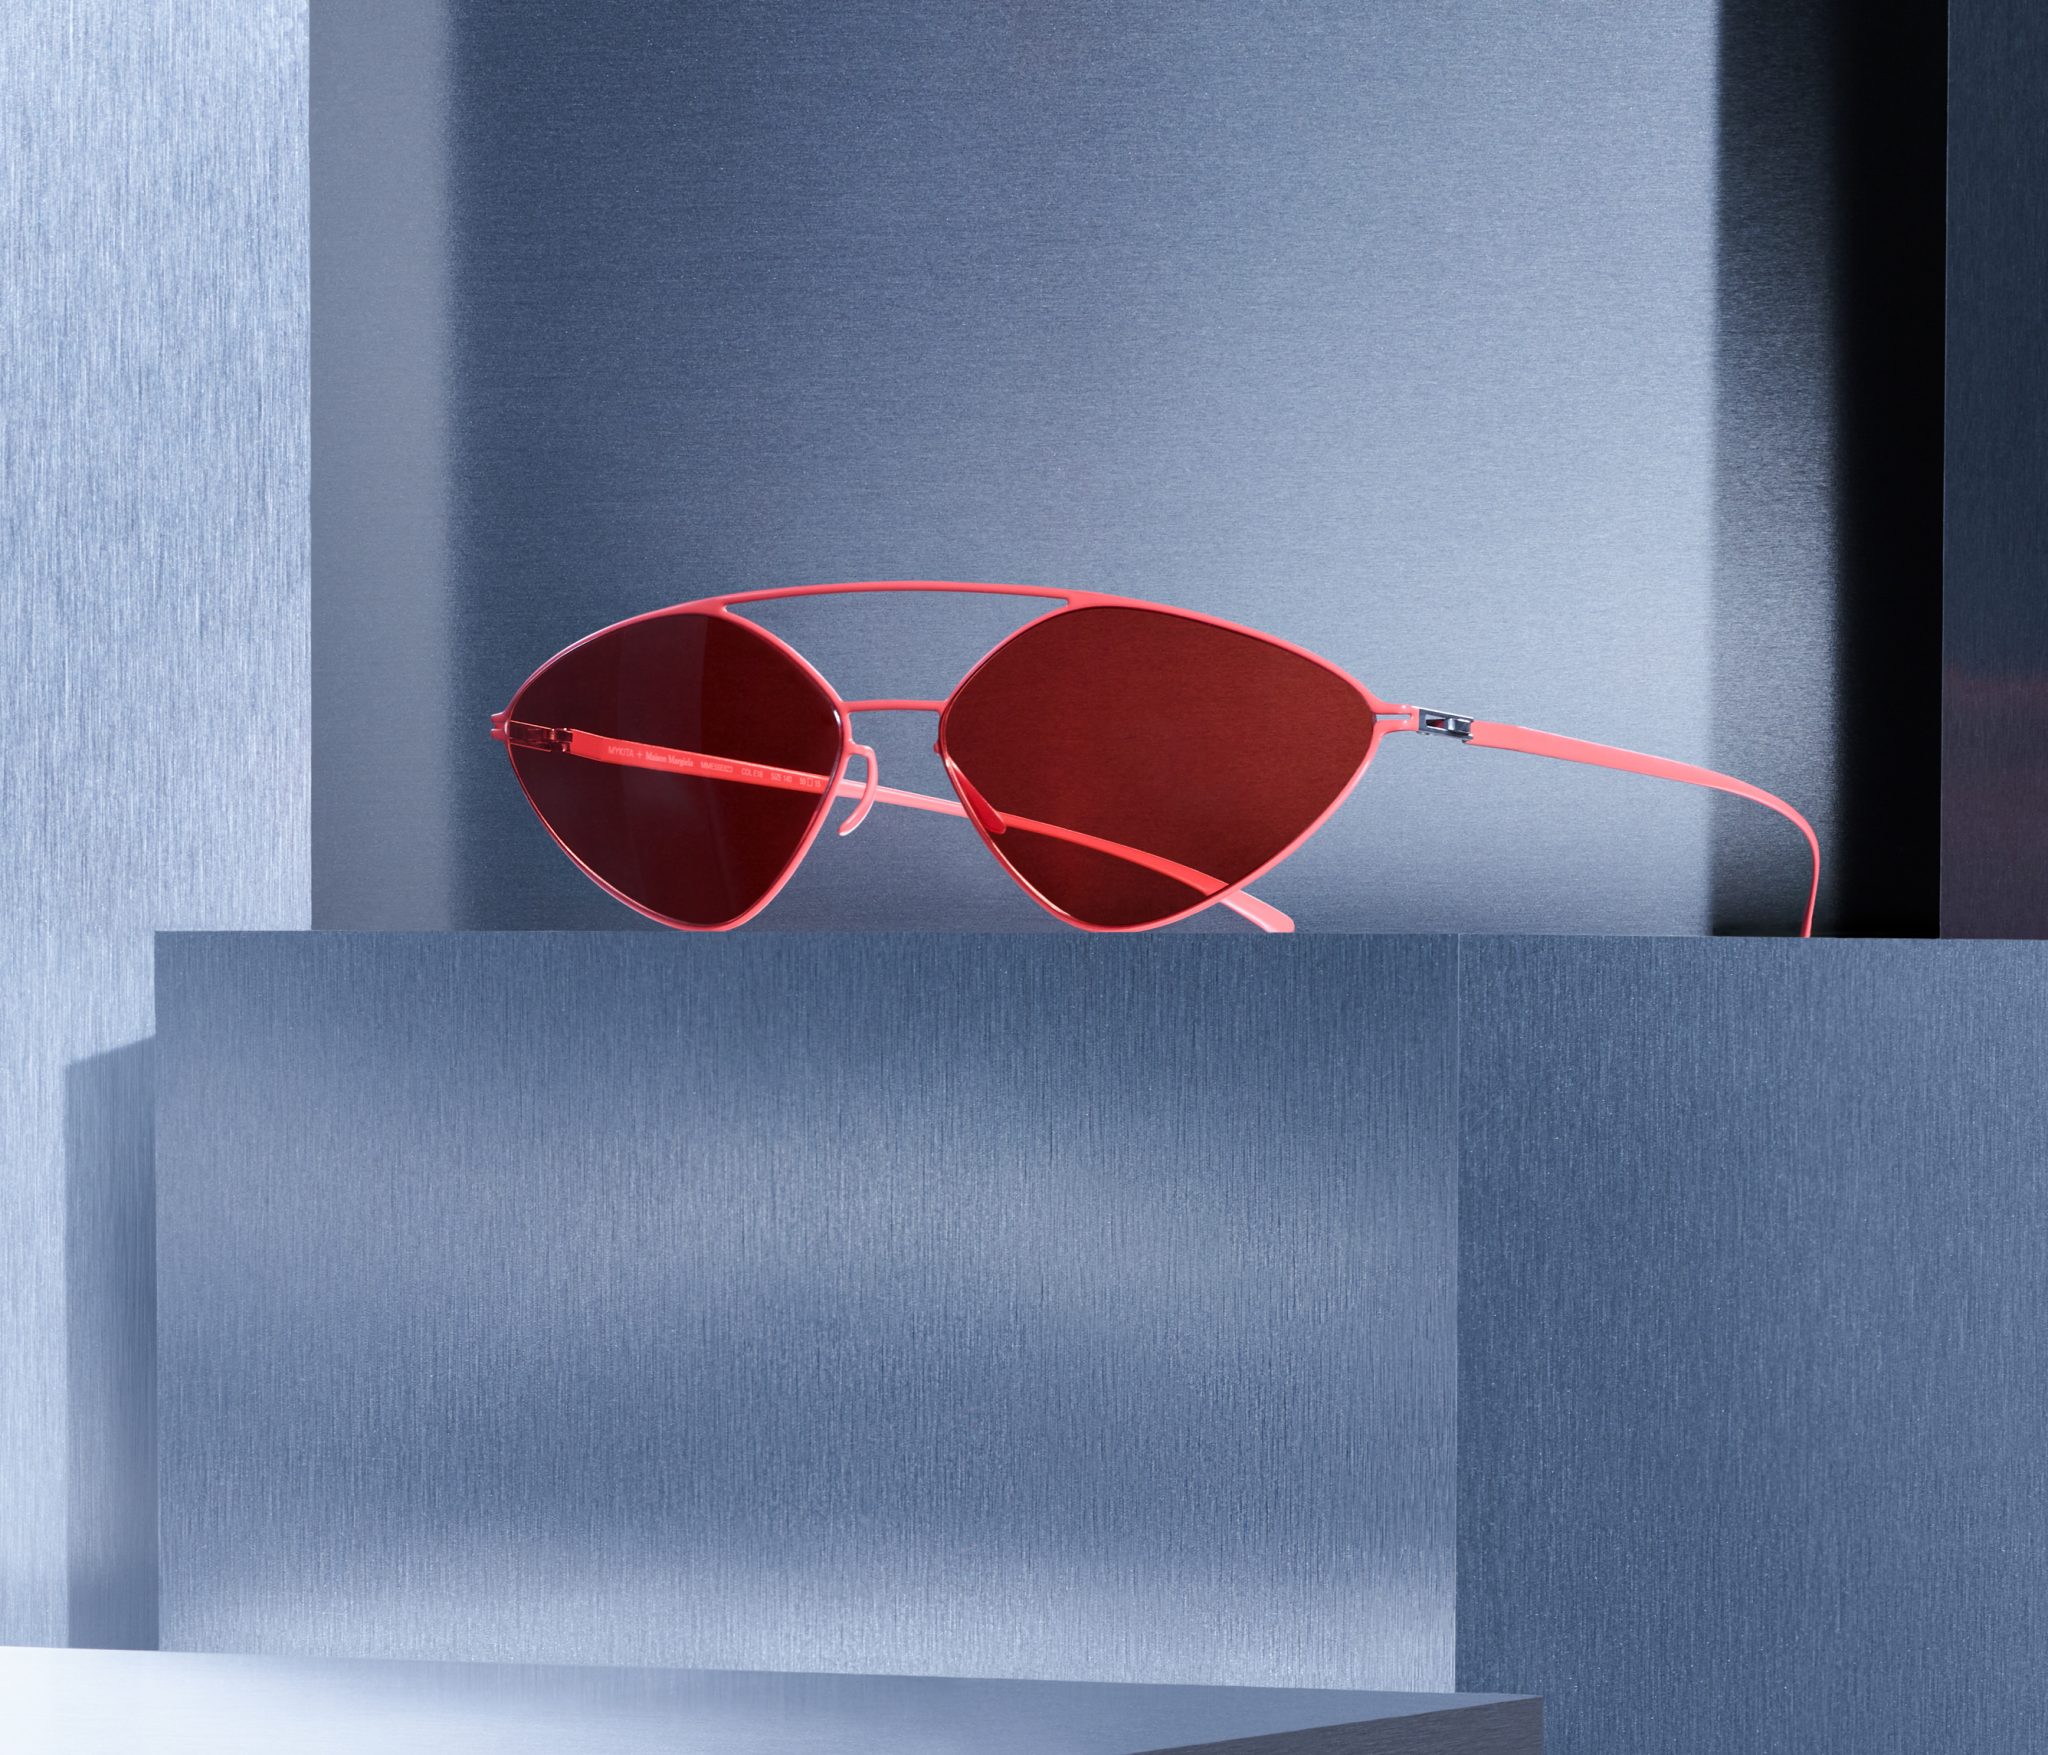 09-mykita-maison-margiela-campaign-2019-09-mmesse23-baywatch-red-ultra-red-solid-srgb-header